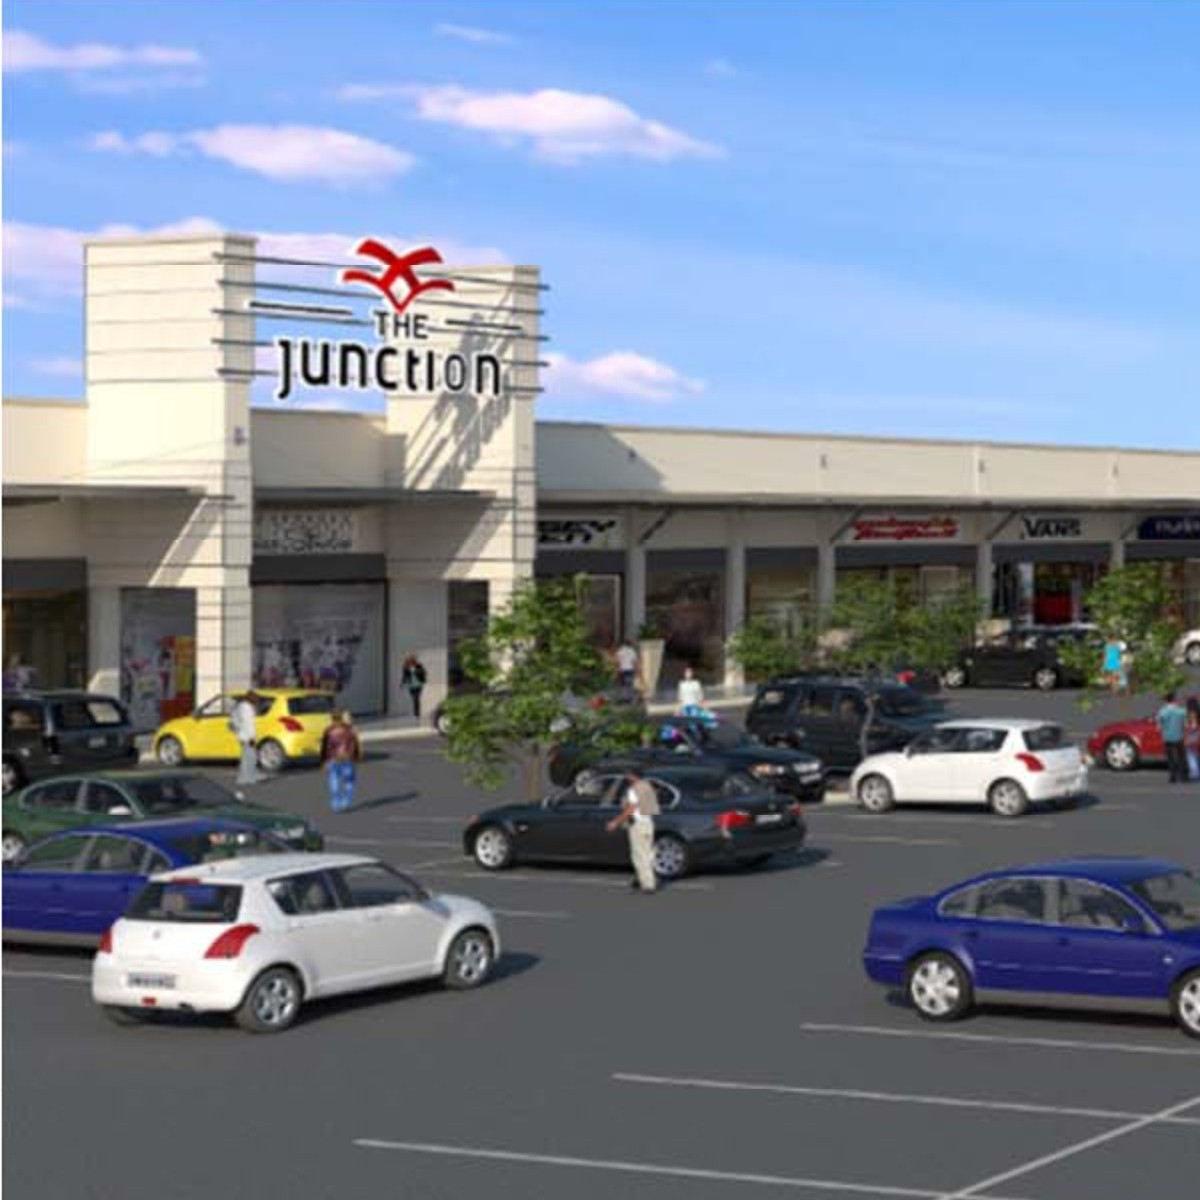 TheJunction_01